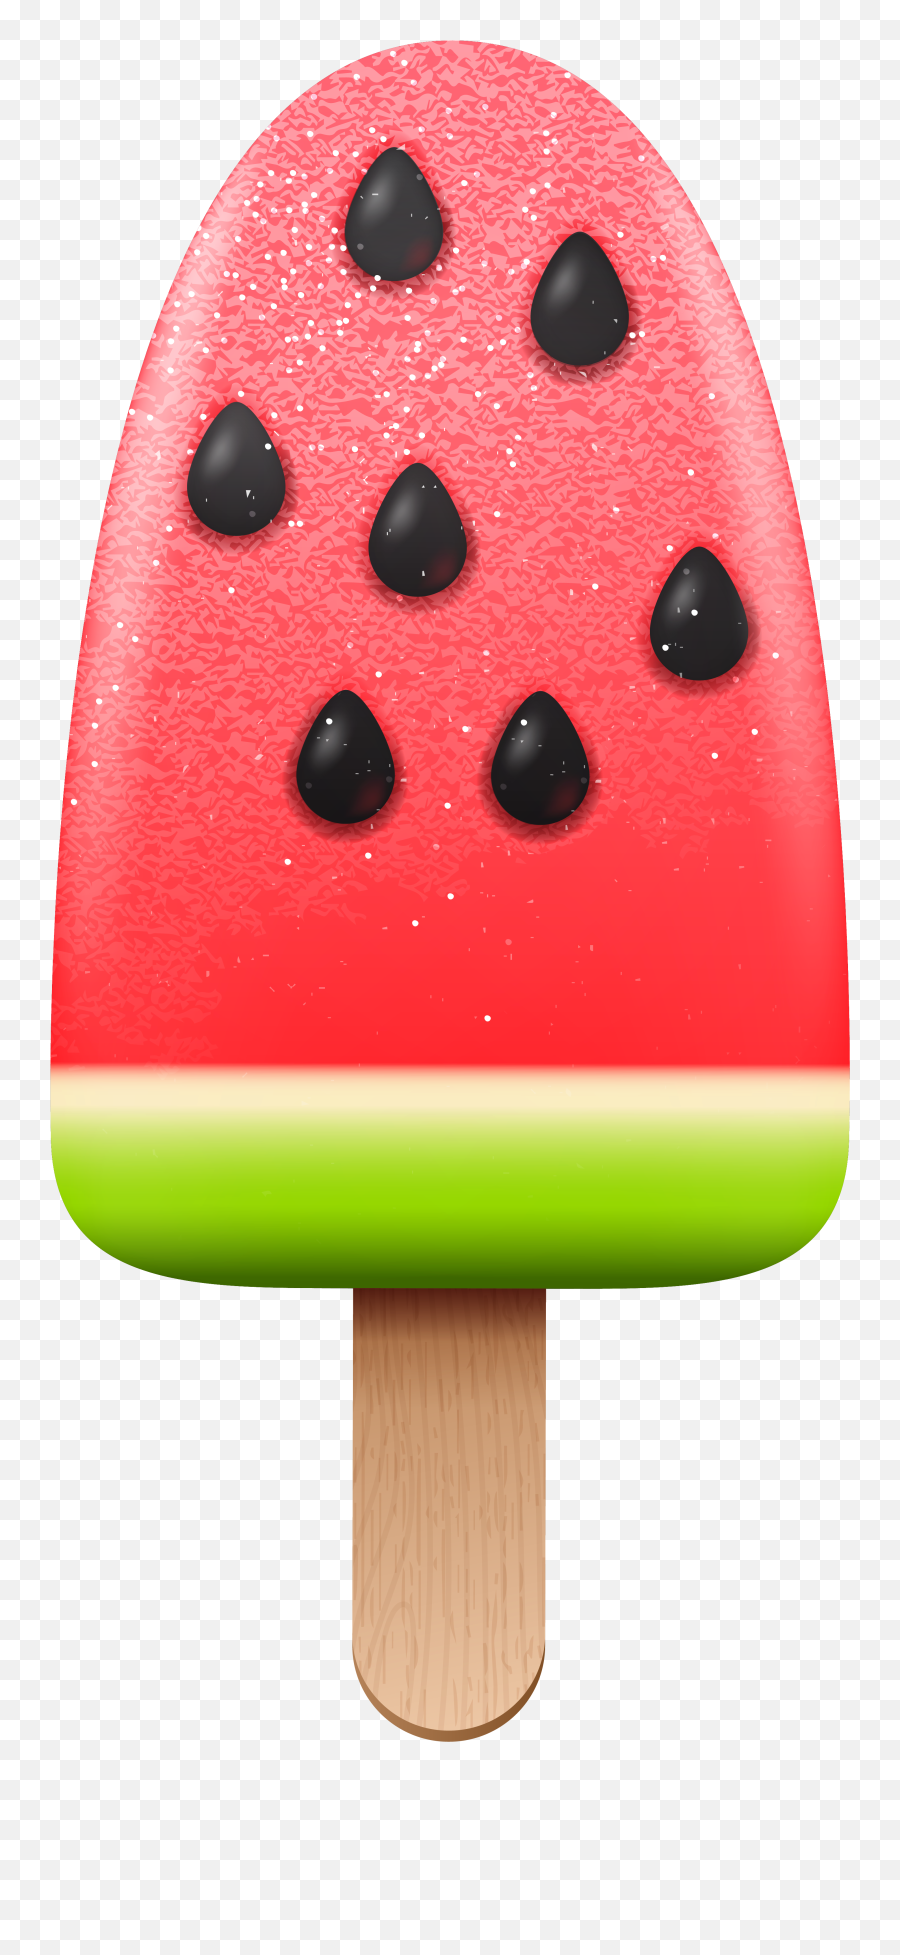 Melon Ice Cream Png Clipart Image - Red Melon Ice Cream,Watermelon Png Clipart